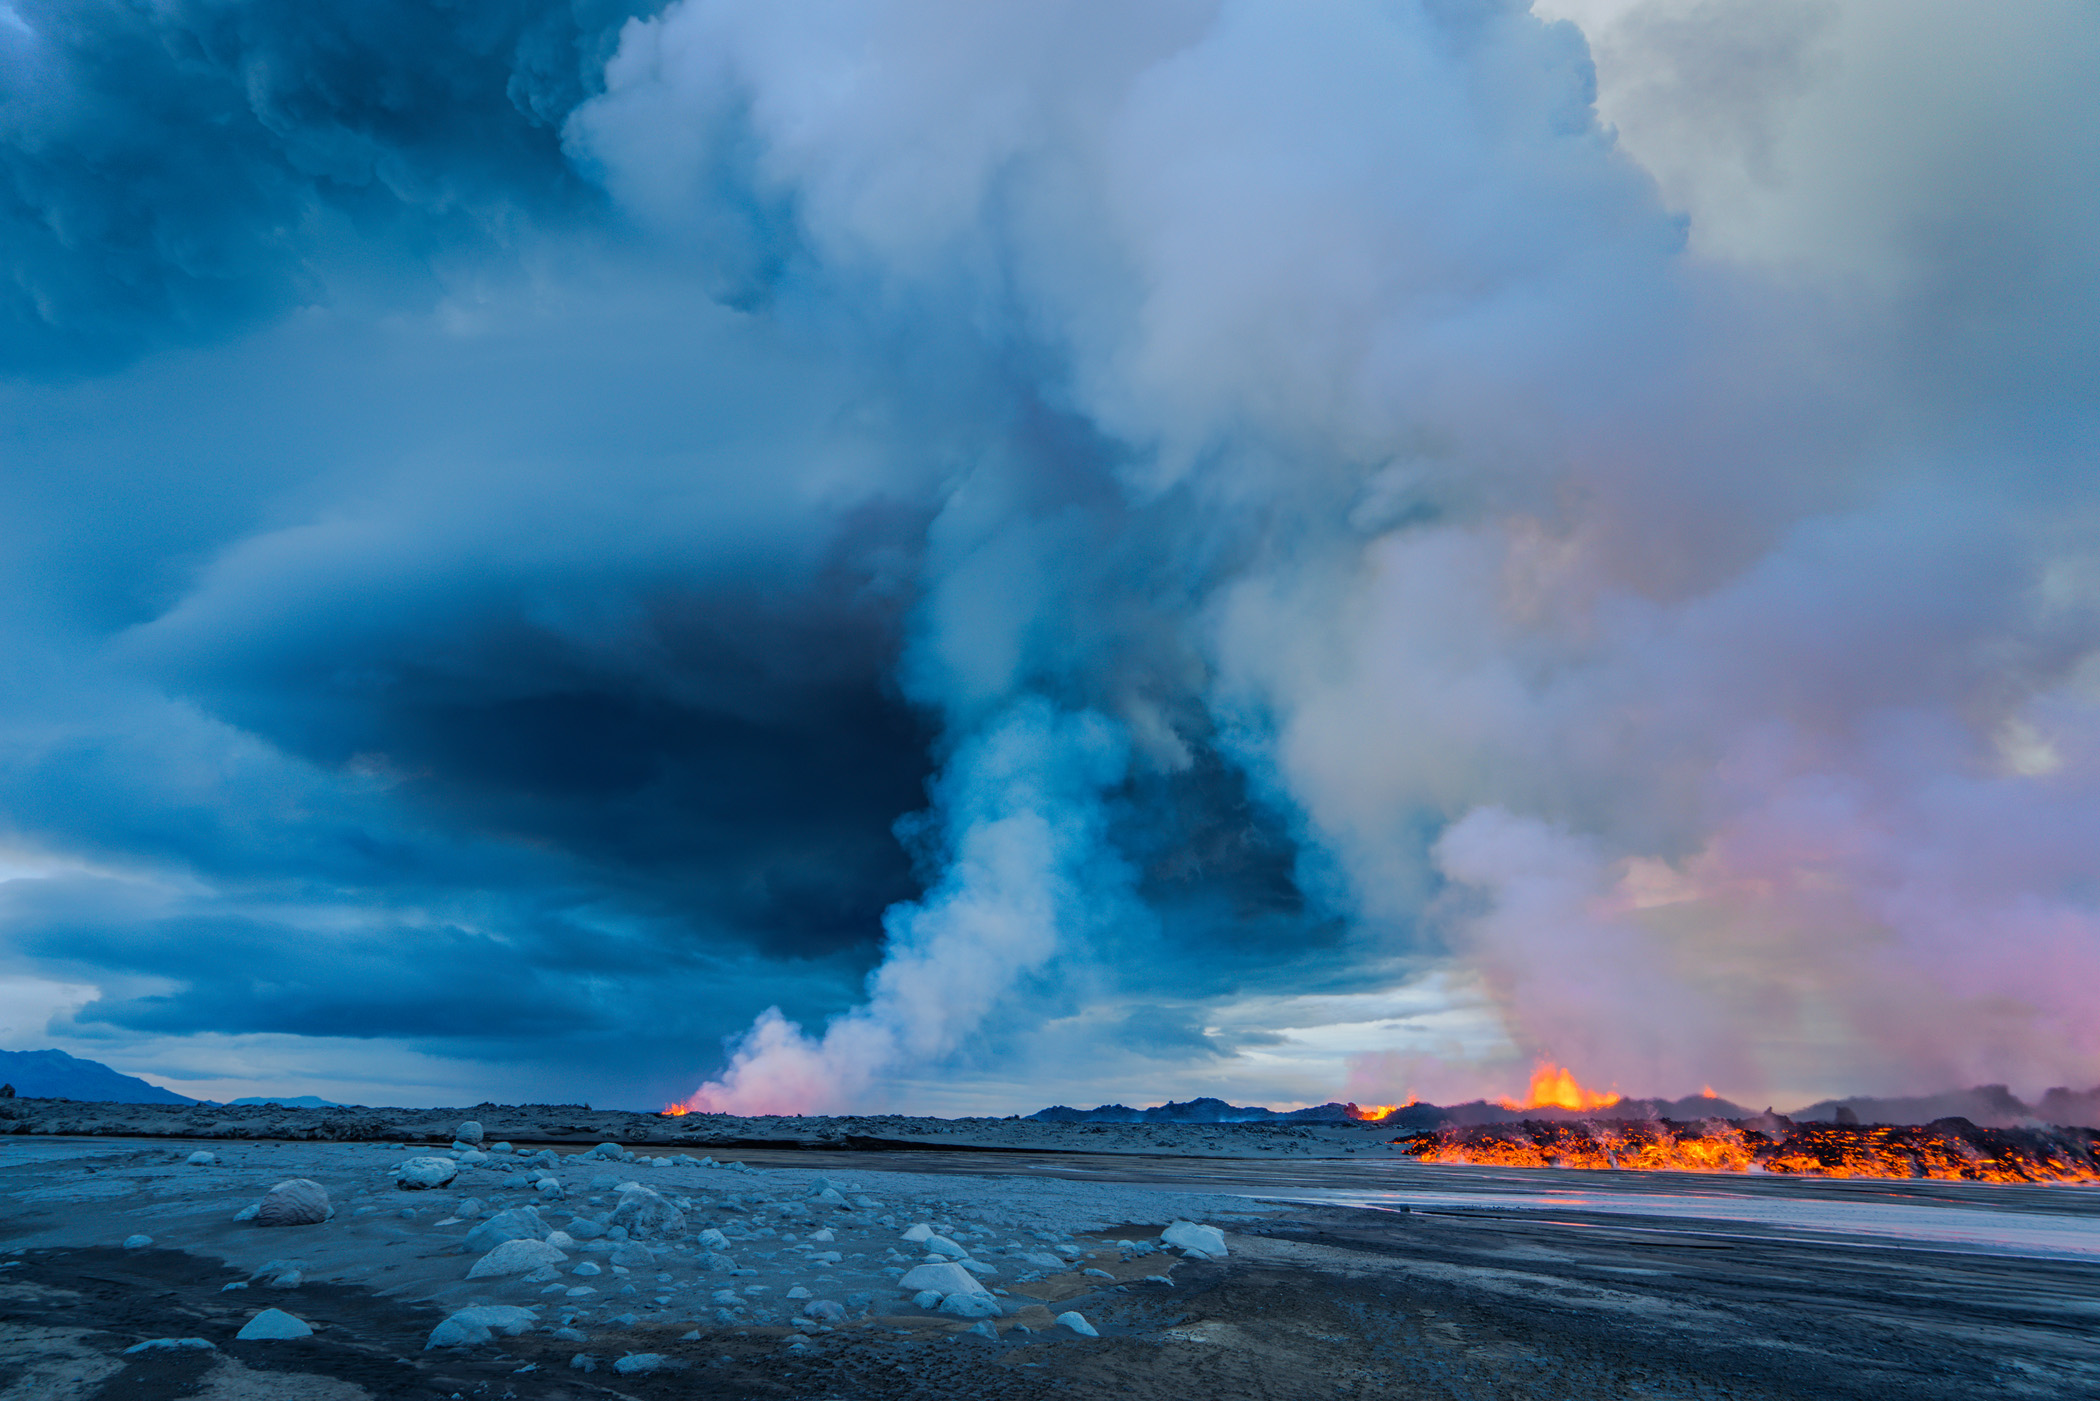 A late afternoon wide angle view over a part of the 2 km long fissure erupting and the cloud of fumes and steam rising into the air.